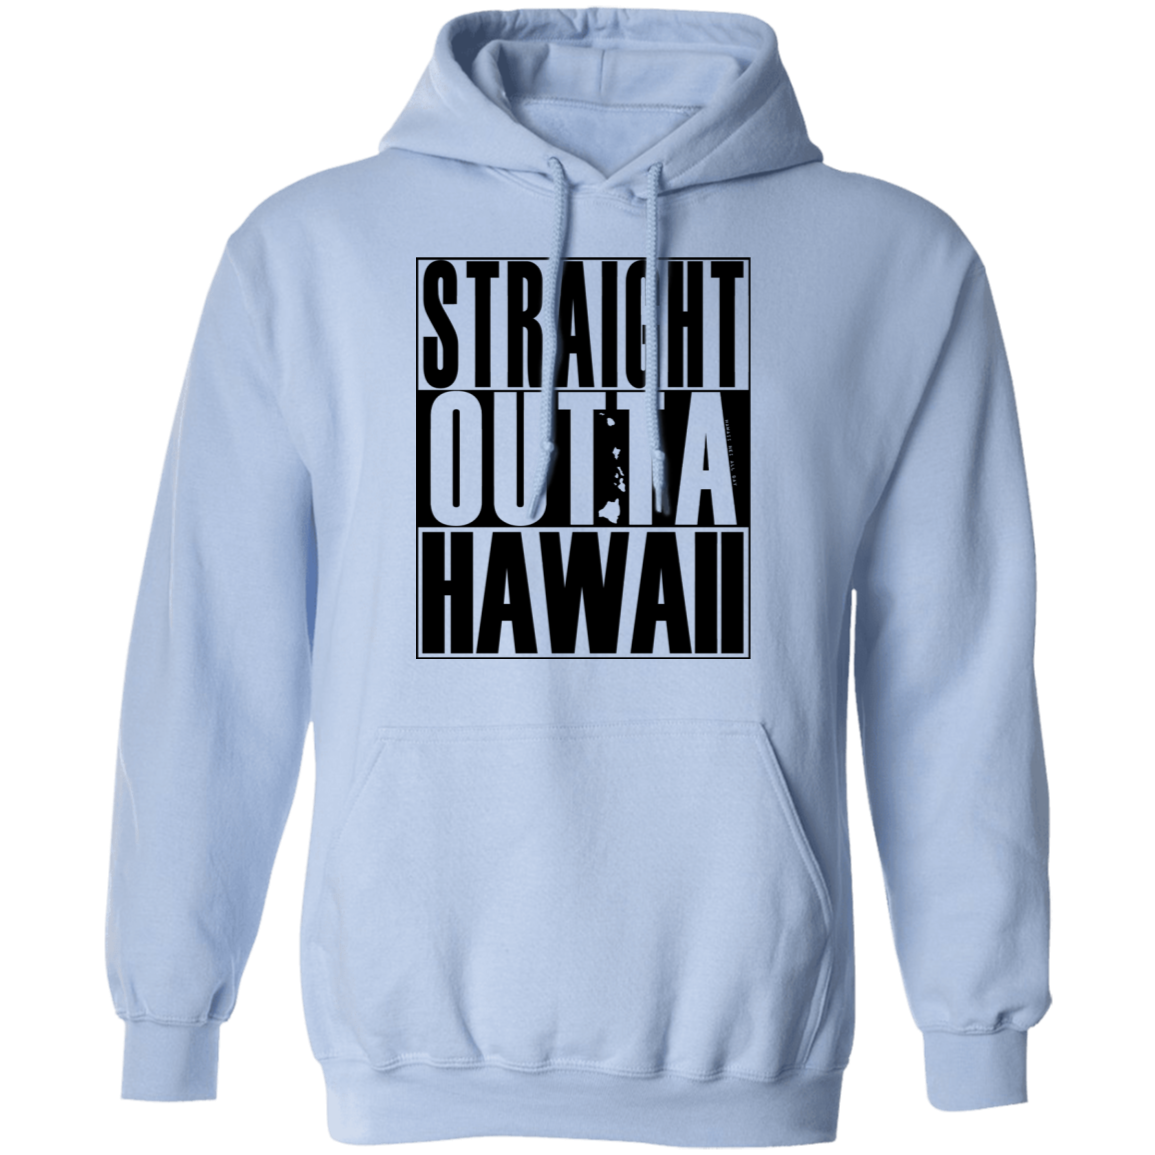 Straight Outta Hawaii(black ink) Pullover Hoodie